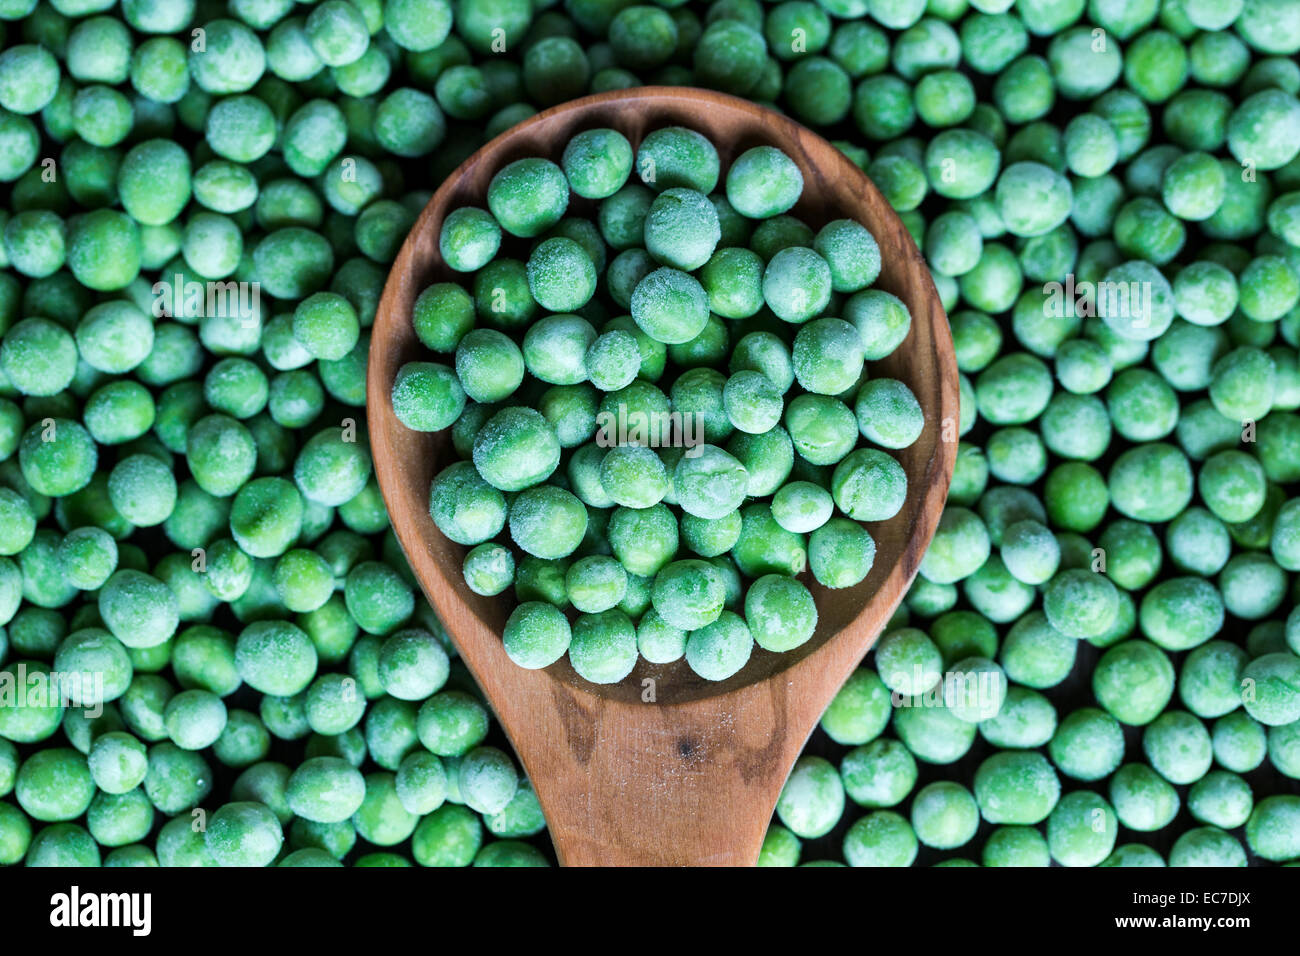 Wooden spoon and frozen peas Stock Photo